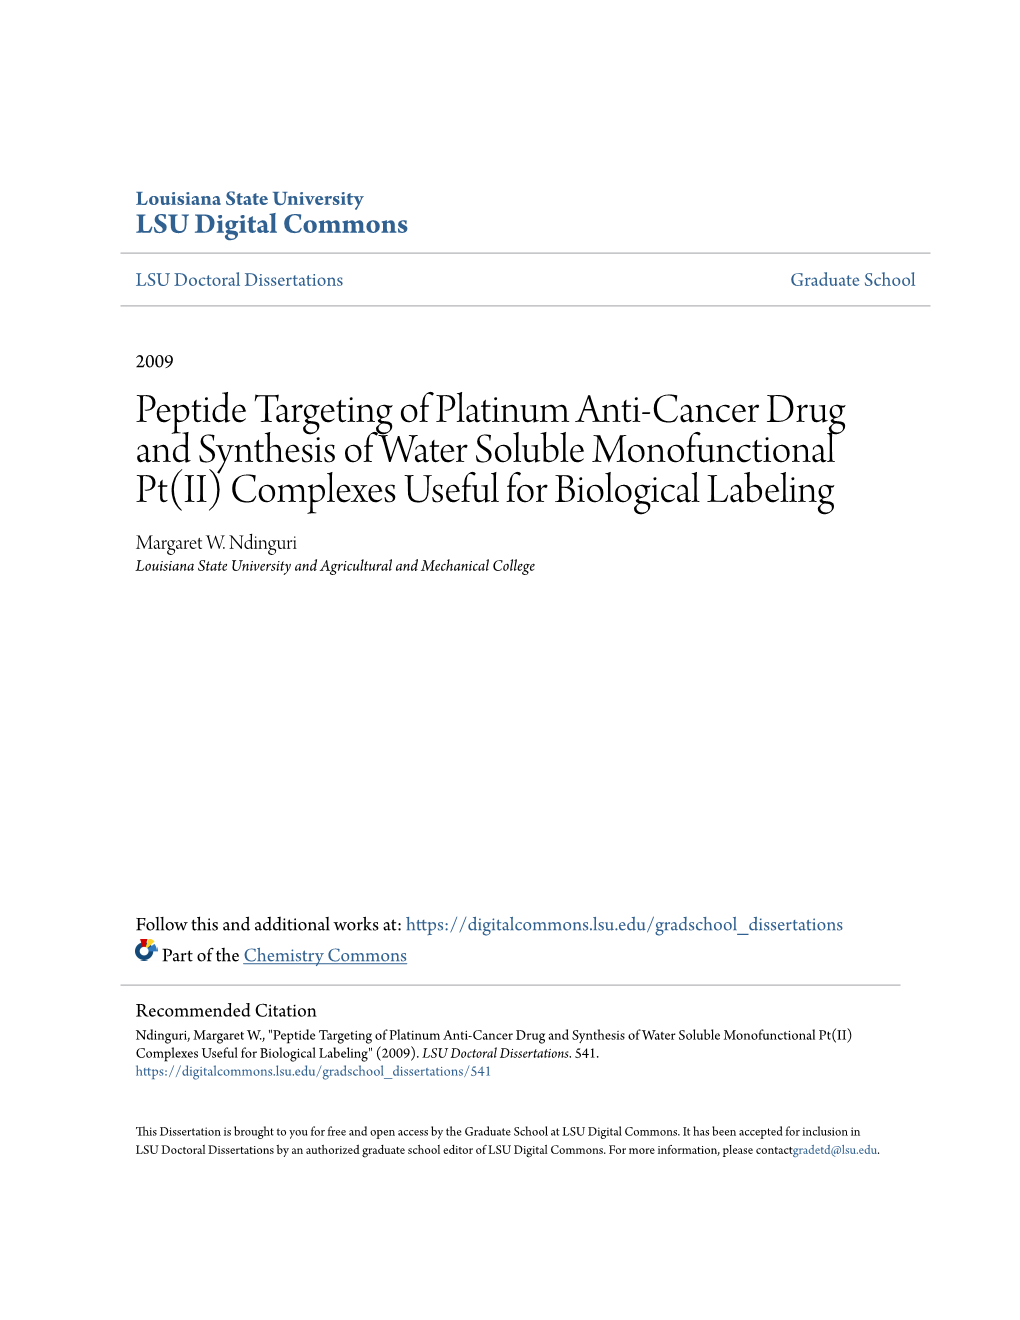 Peptide Targeting of Platinum Anti-Cancer Drug and Synthesis of Water Soluble Monofunctional Pt(II) Complexes Useful for Biological Labeling Margaret W